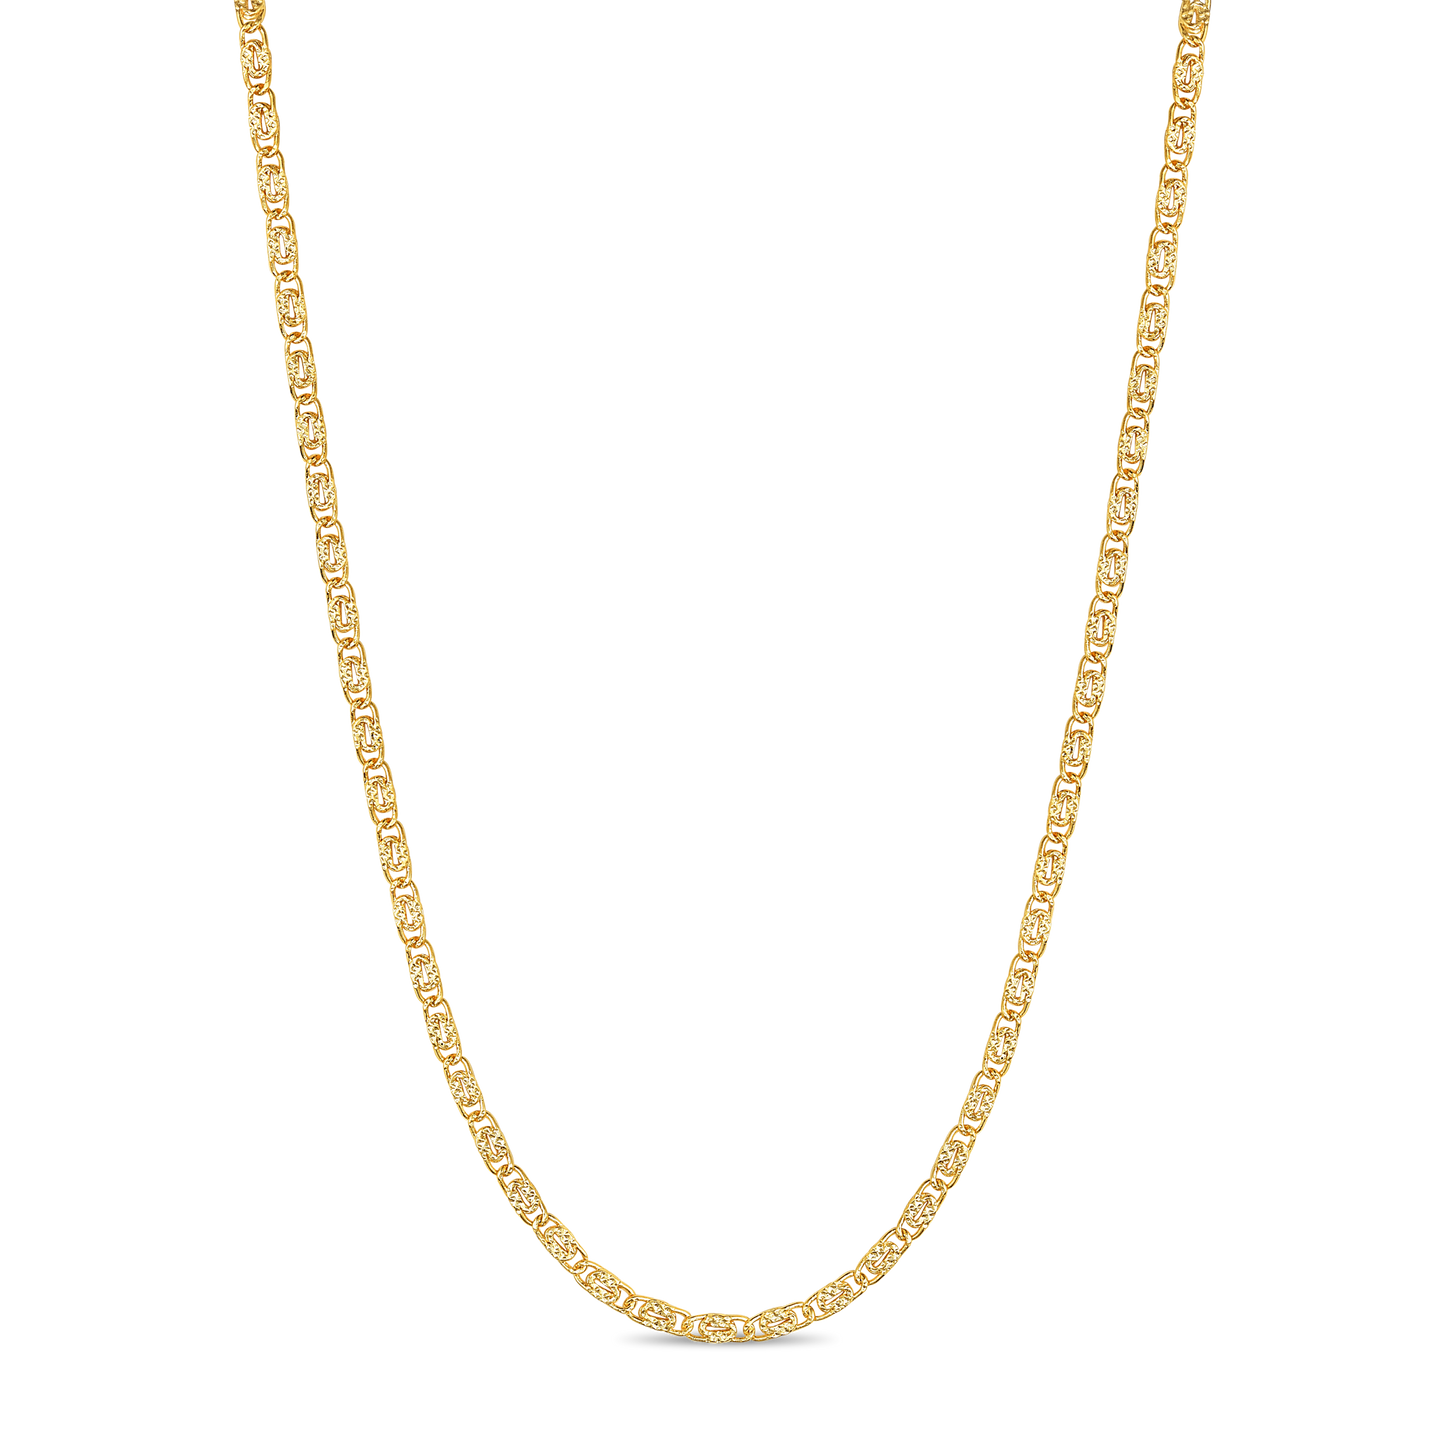 The Supreme Necklace